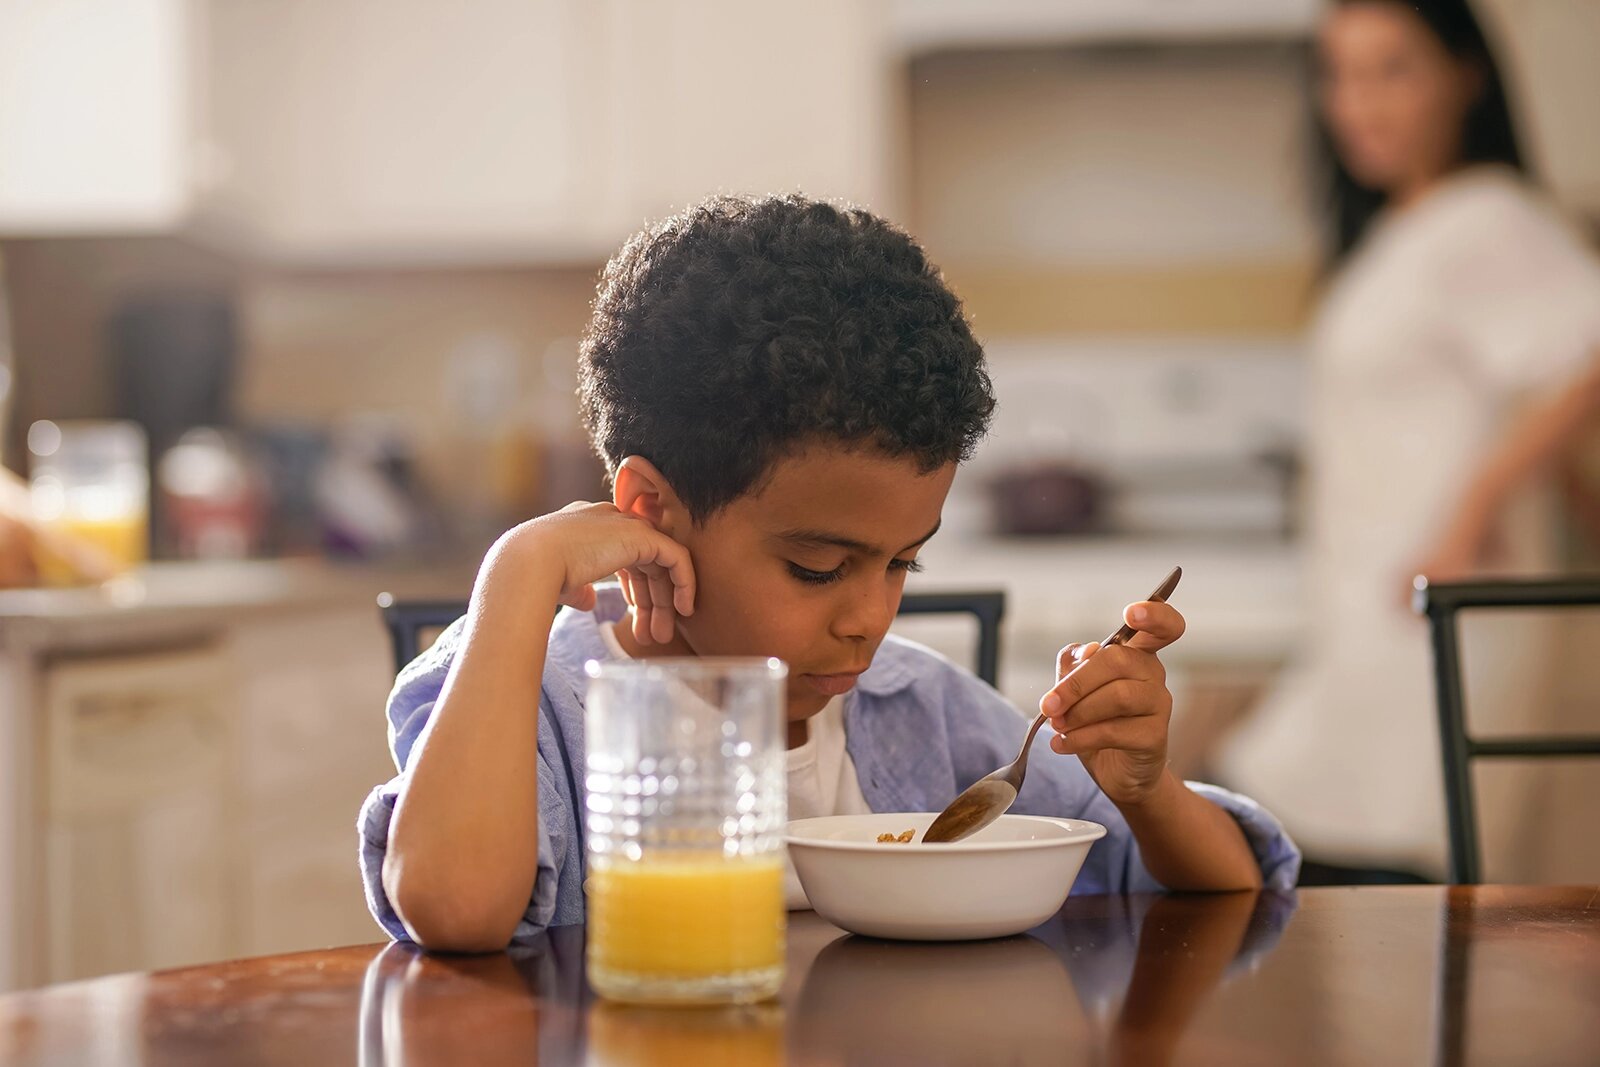 a child eating breakfast